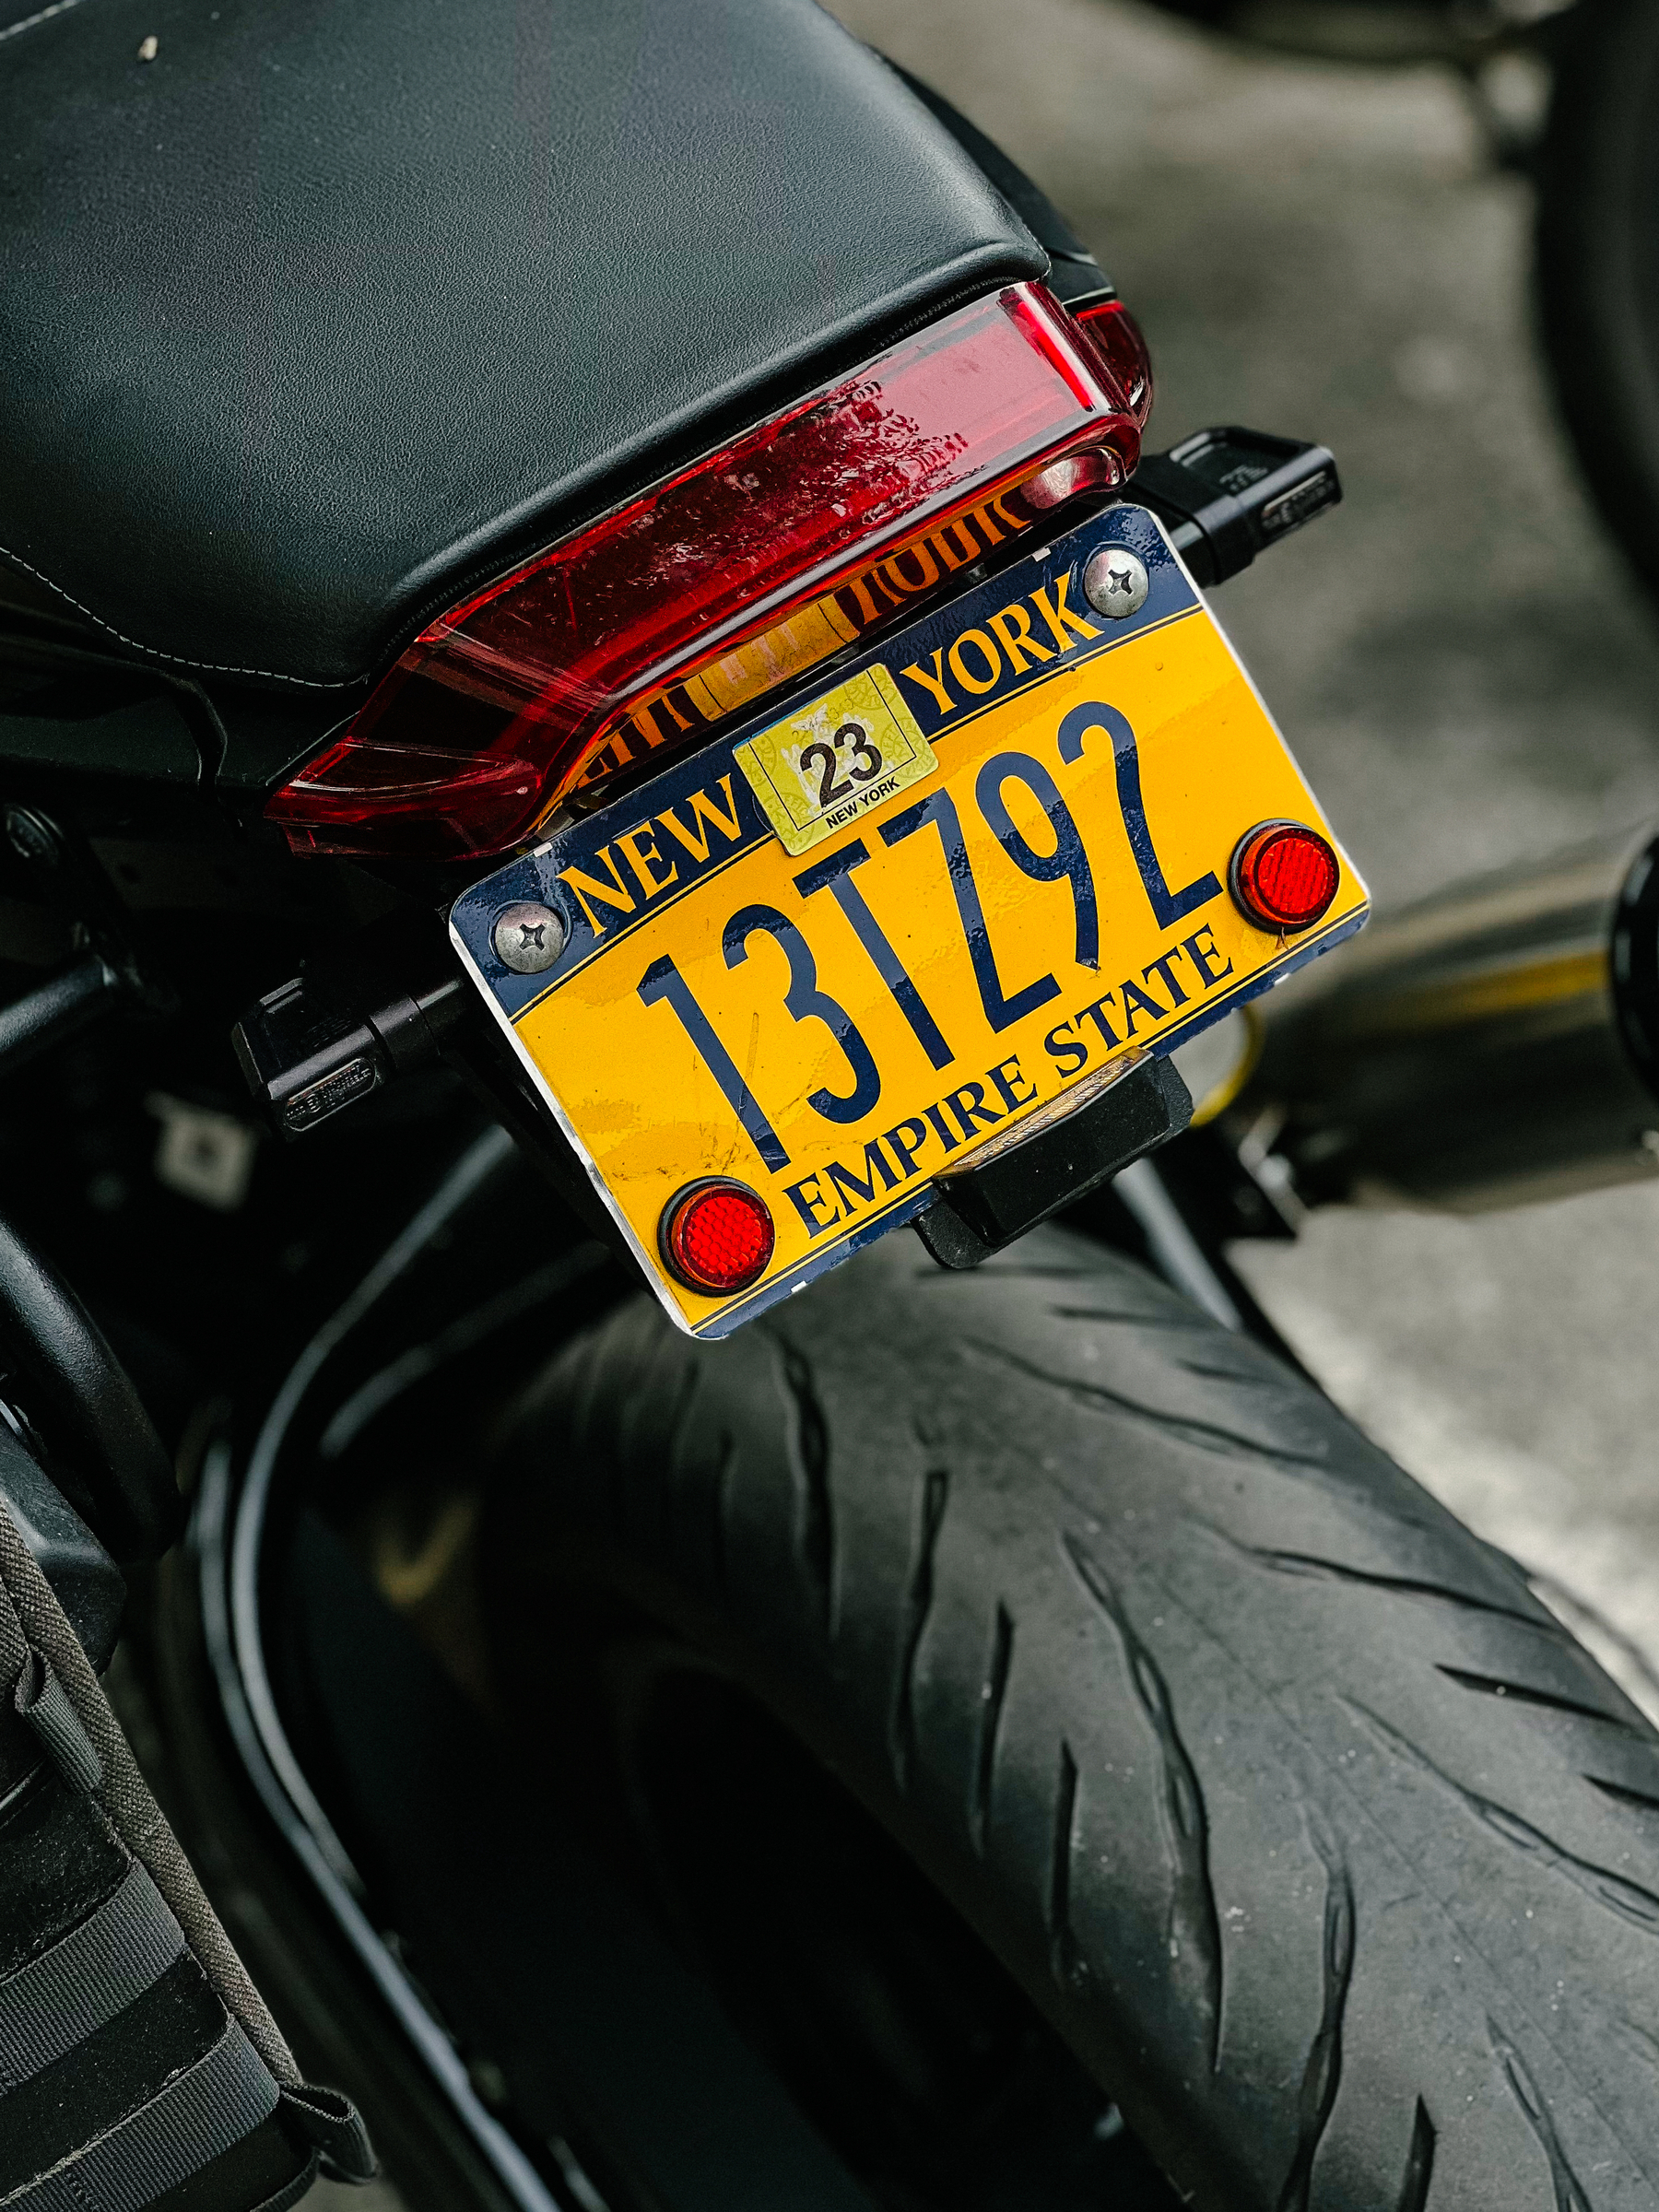 A motorcycle with NY license plates.